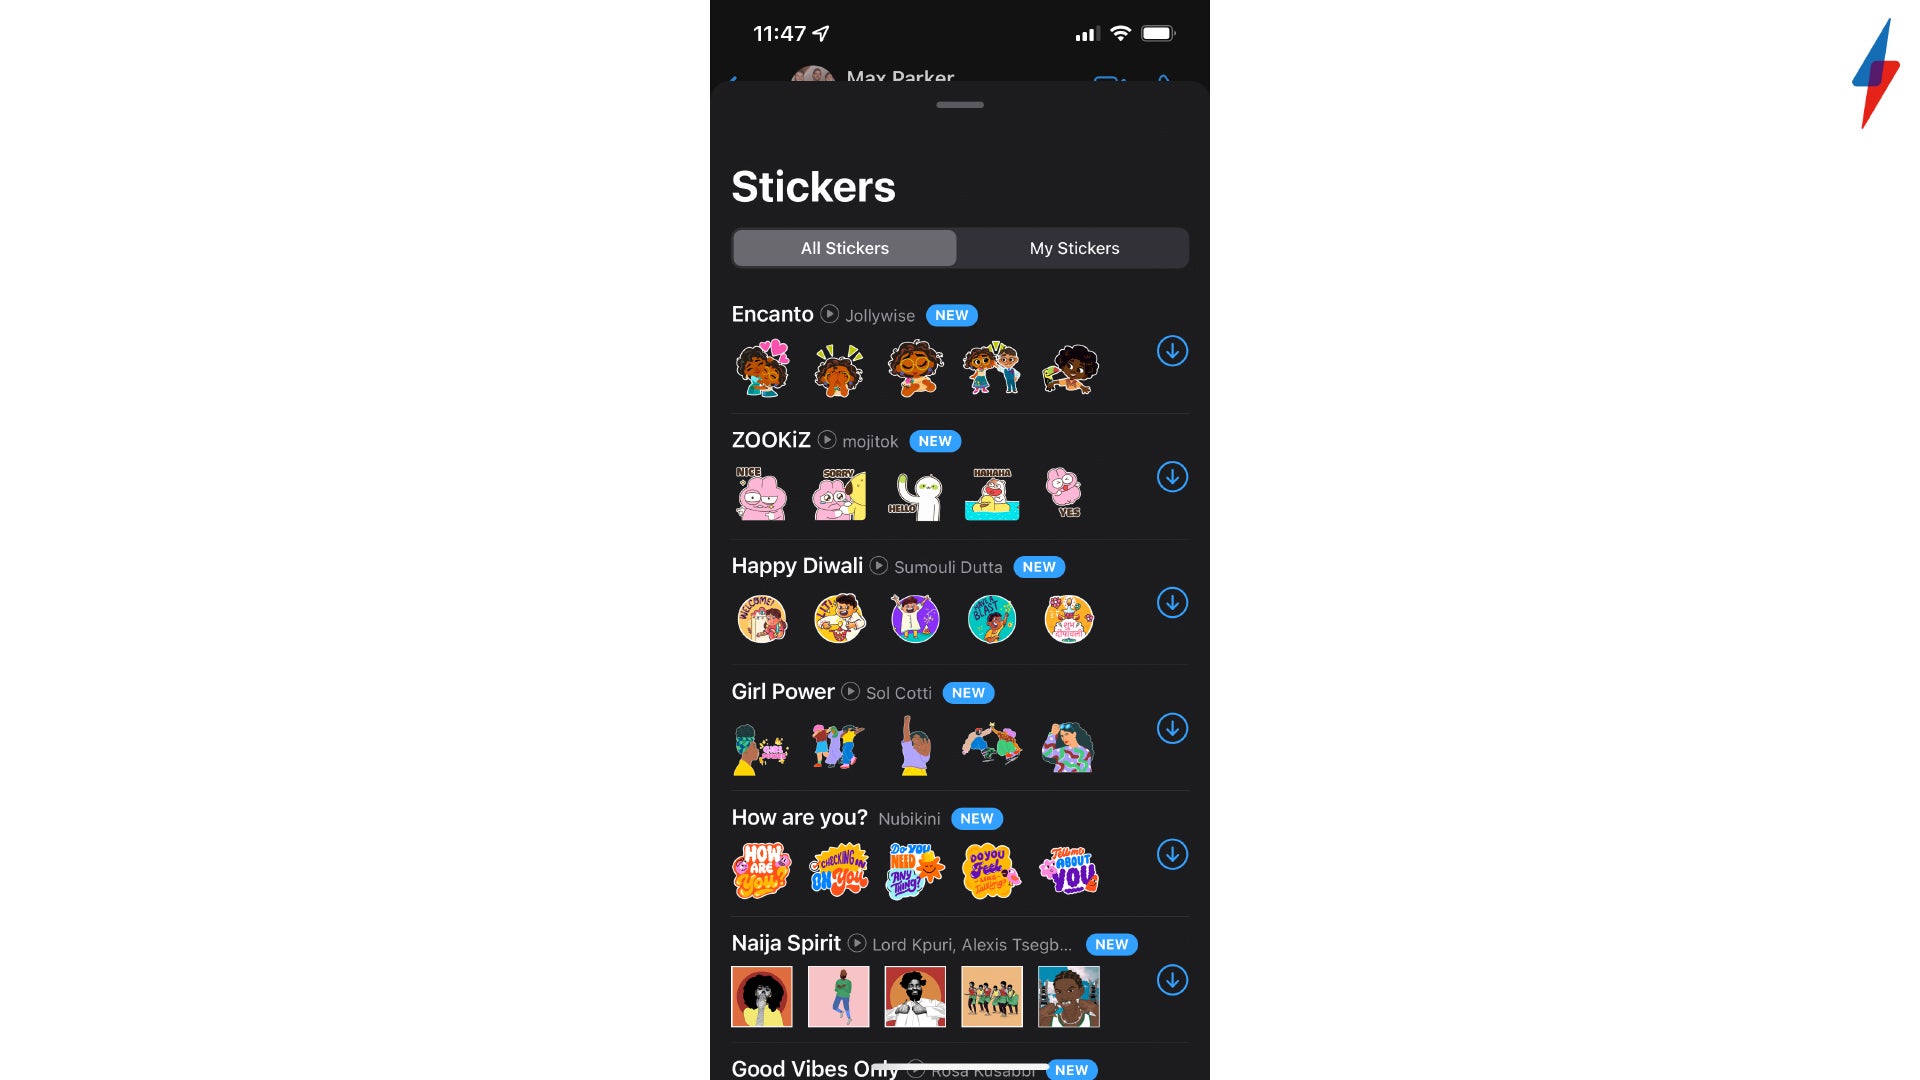 Download your new WhatsApp stickers